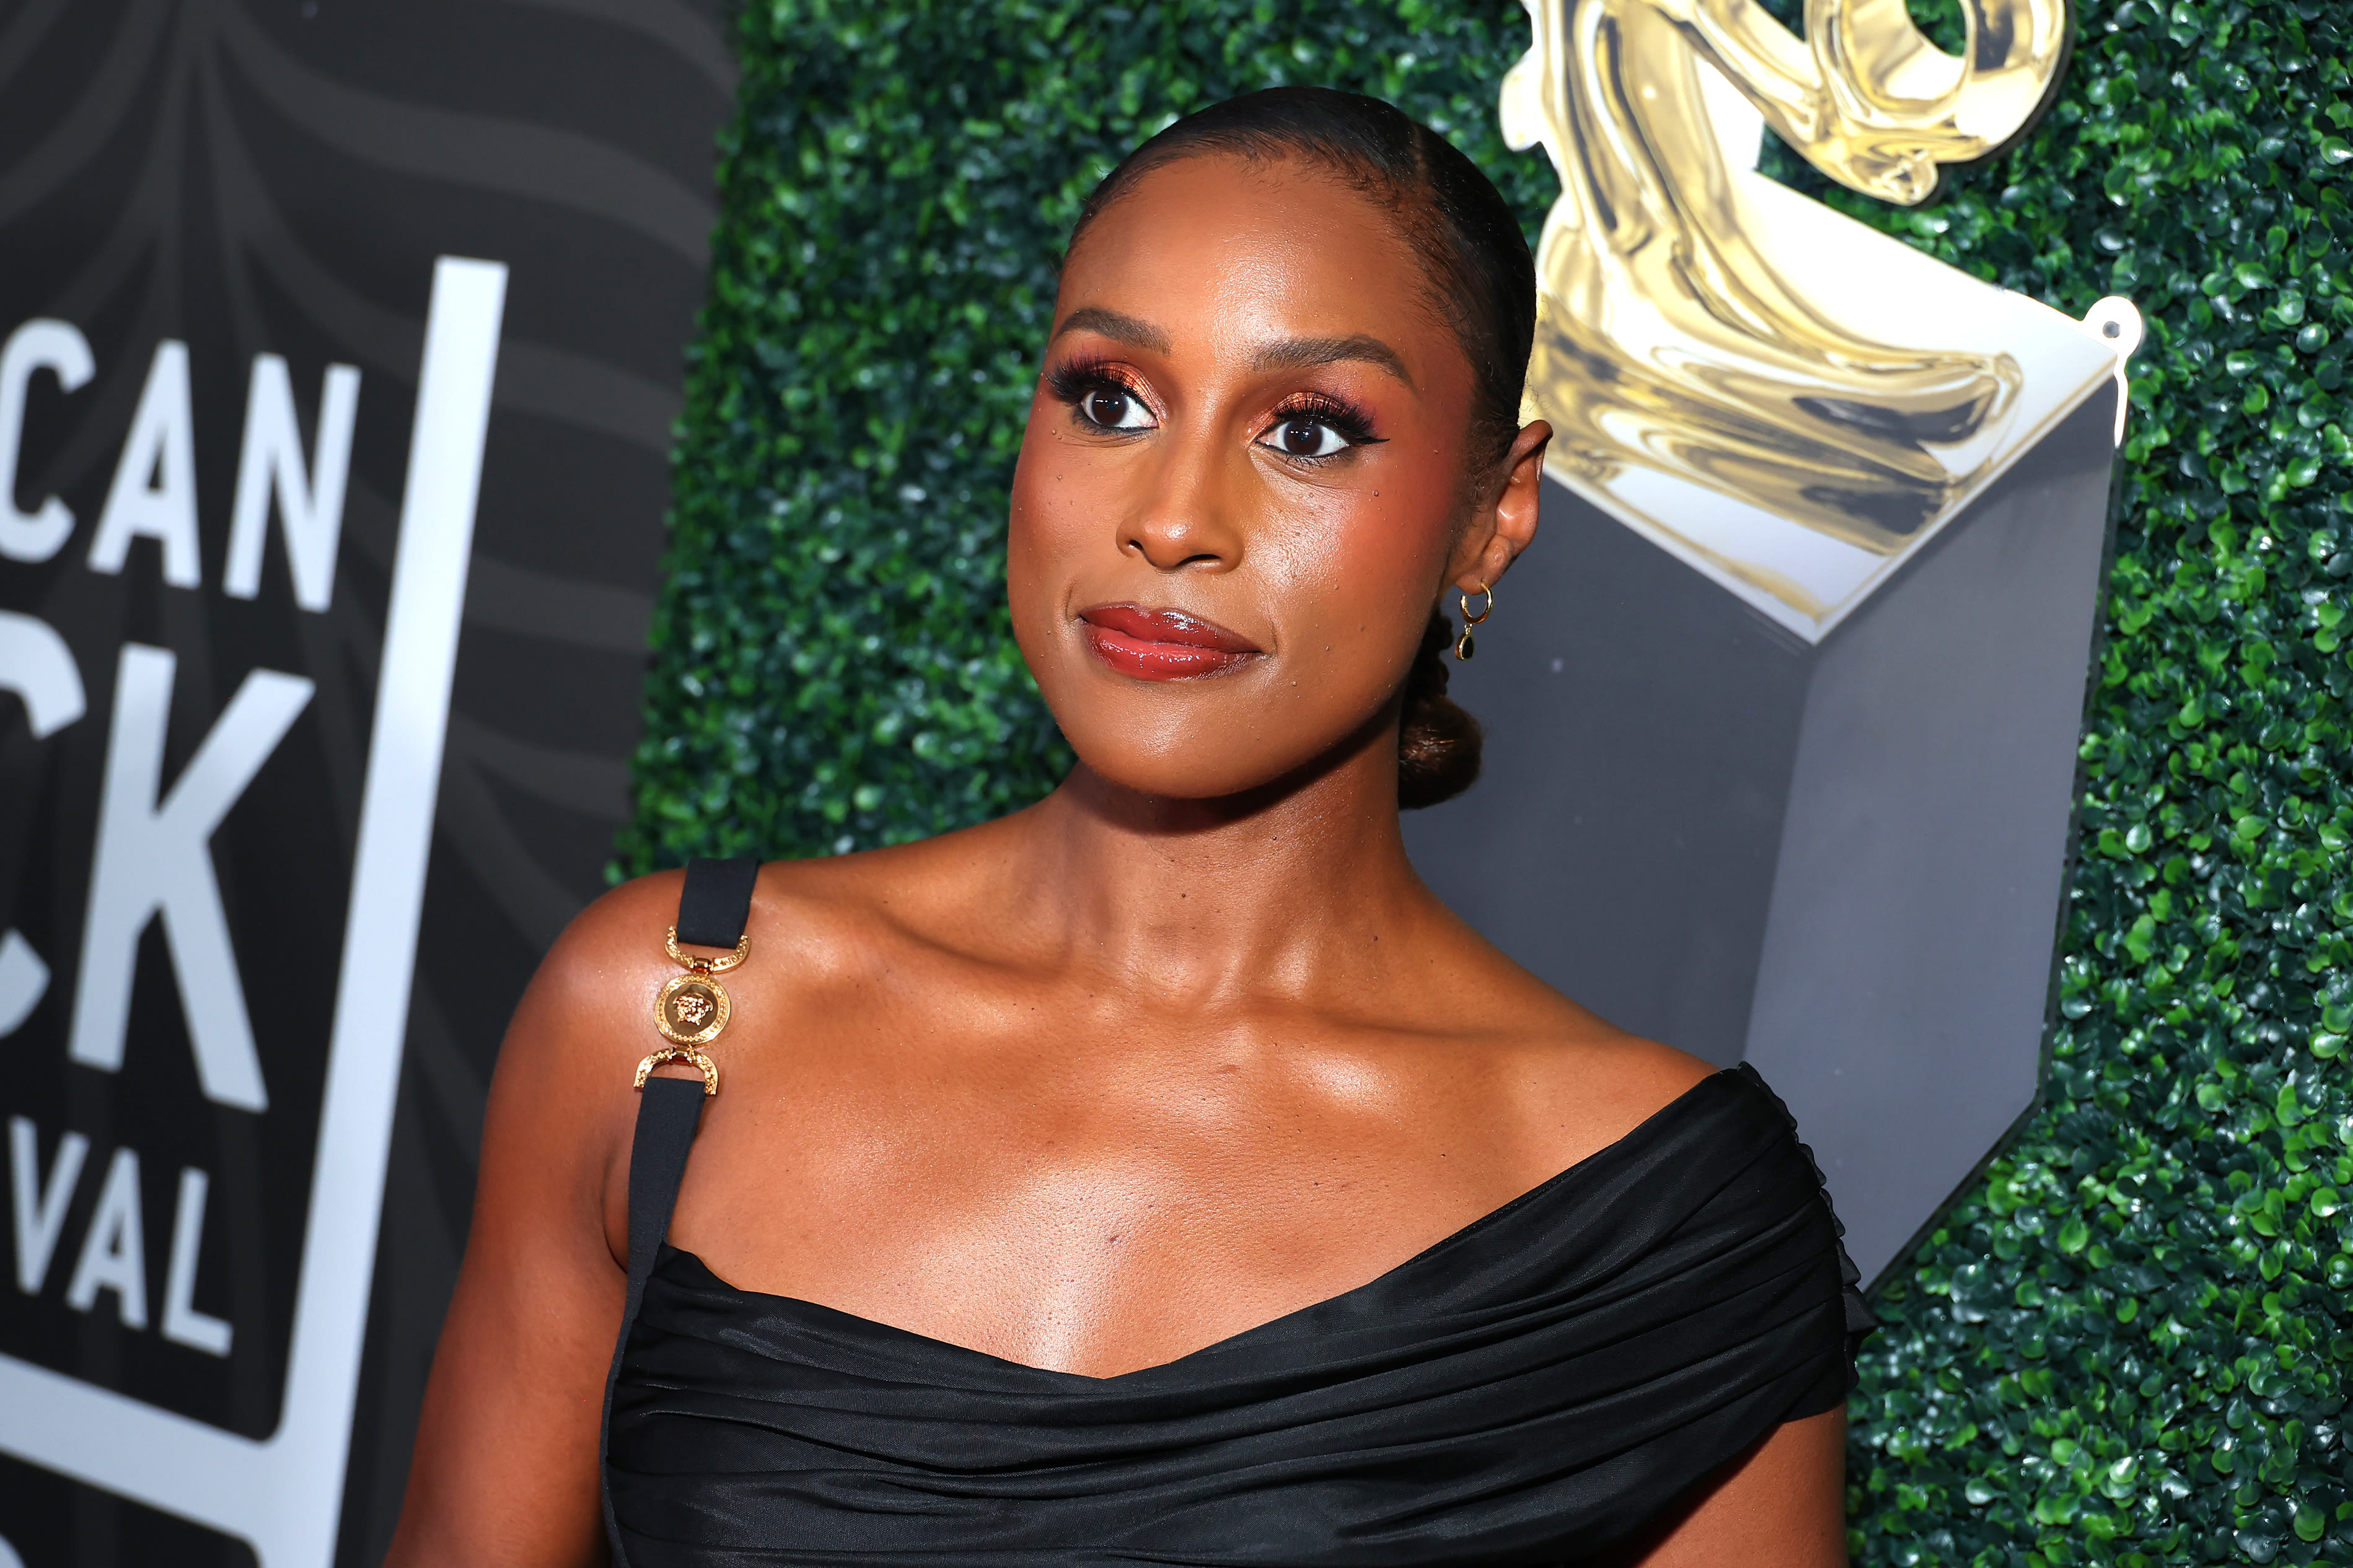 Issa Rae on Hollywood slowdowns: 'It's hard, it's challenging, but we'll make it through'